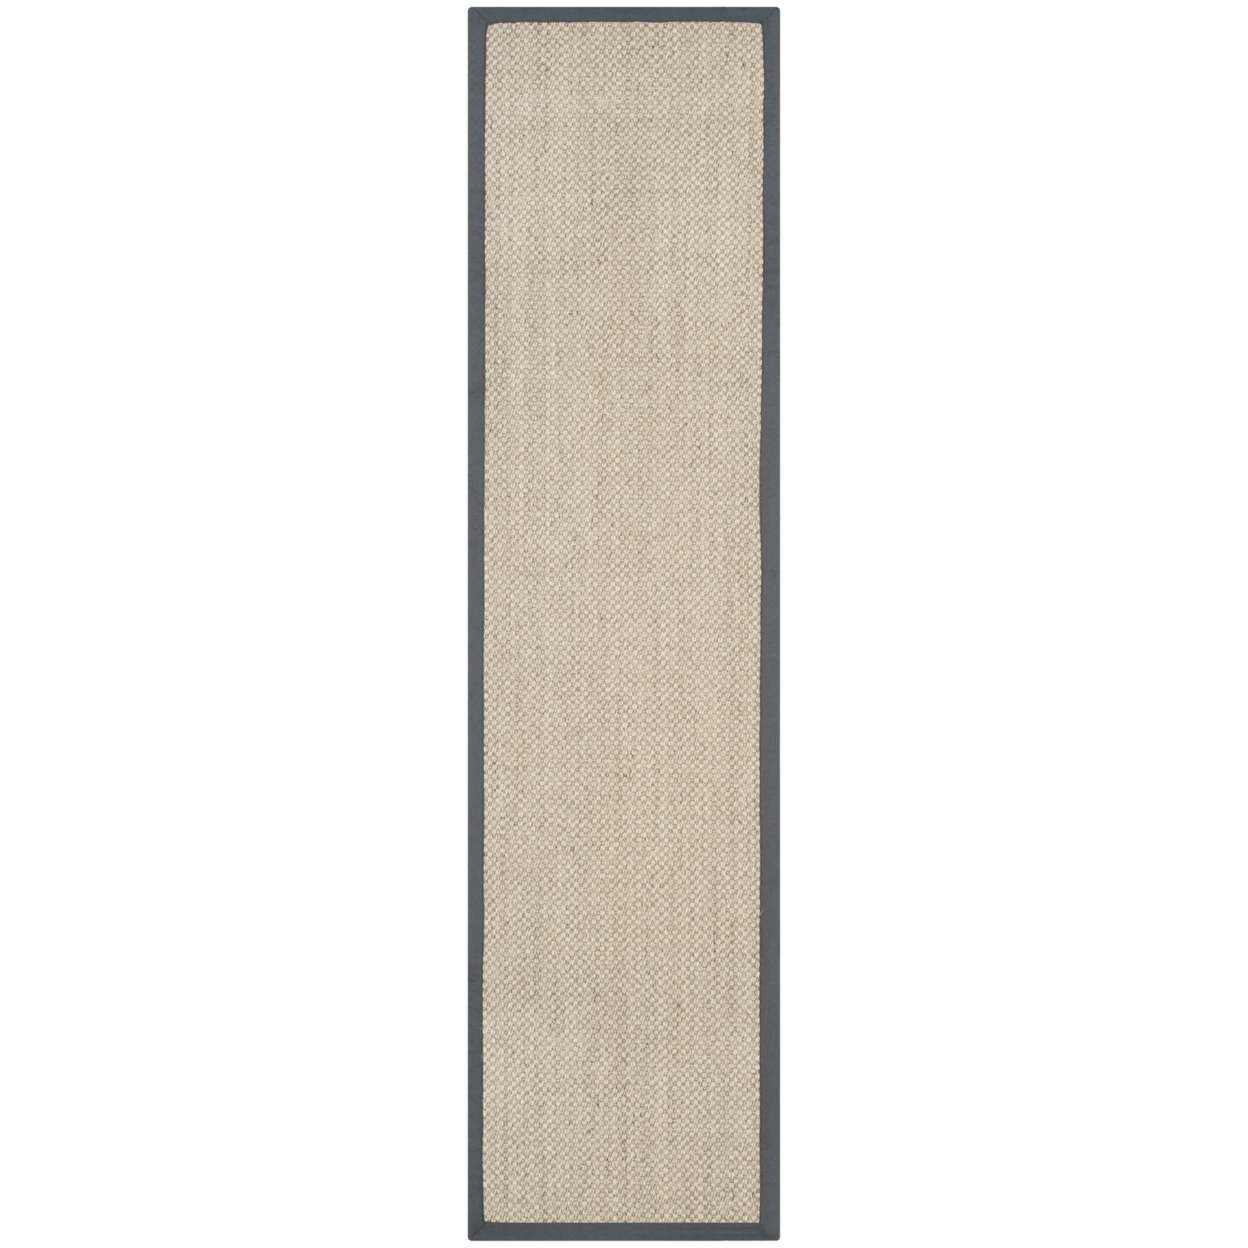 SAFAVIEH Natural Fiber Collection NF443B Marble/Grey Rug - 8' X 10'